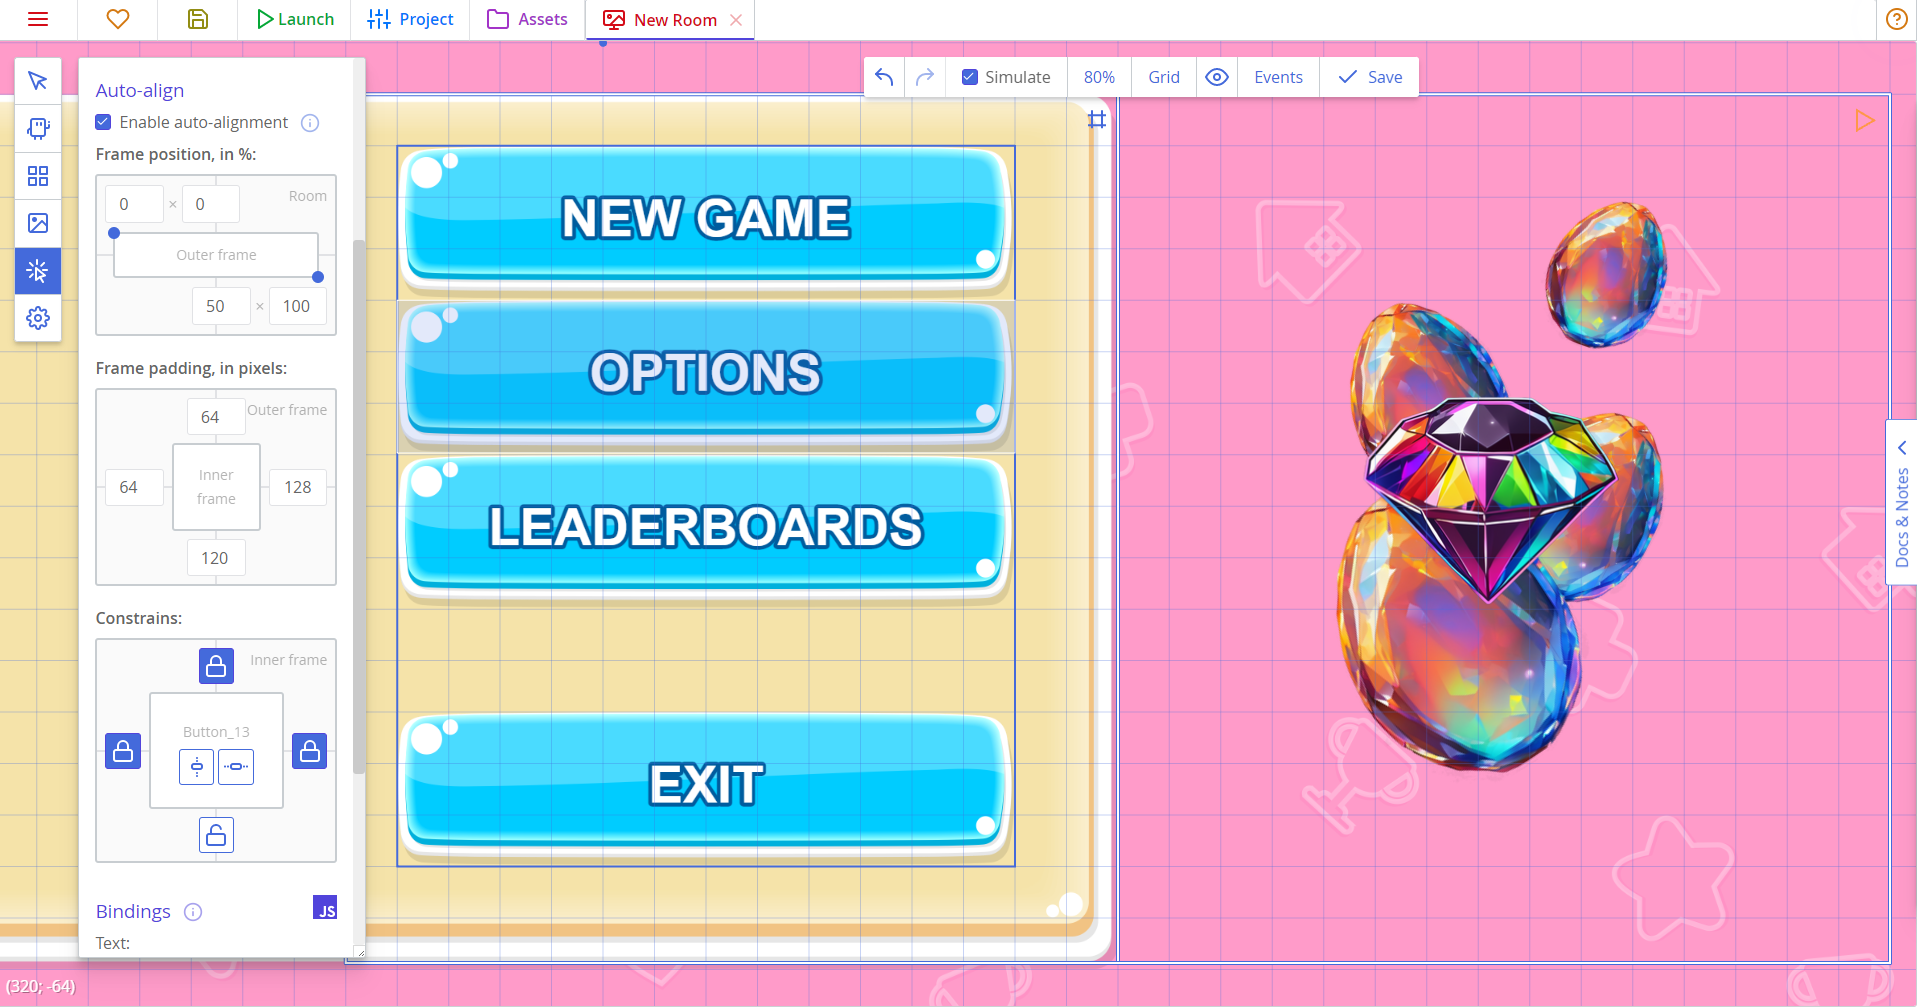 A UI interface with questionable design choices and a split UI layout, with a panel occupying a left side of the screen with buttons inside it